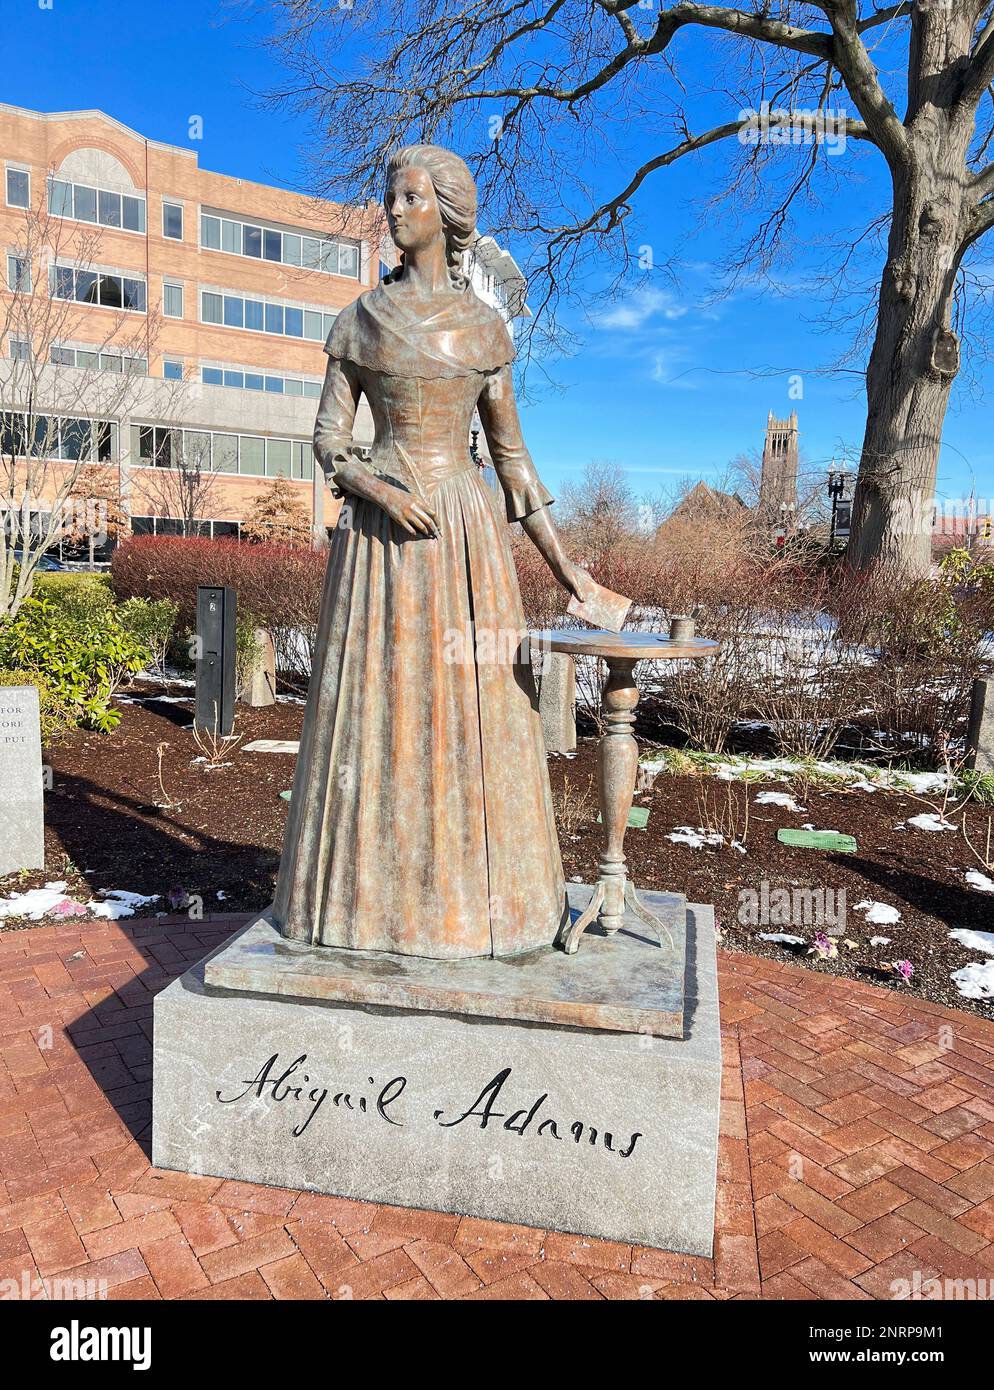 Abigail Adams statue sculpted by Sergey Eylanbekov in Quincy Massachusetts Stock Photo